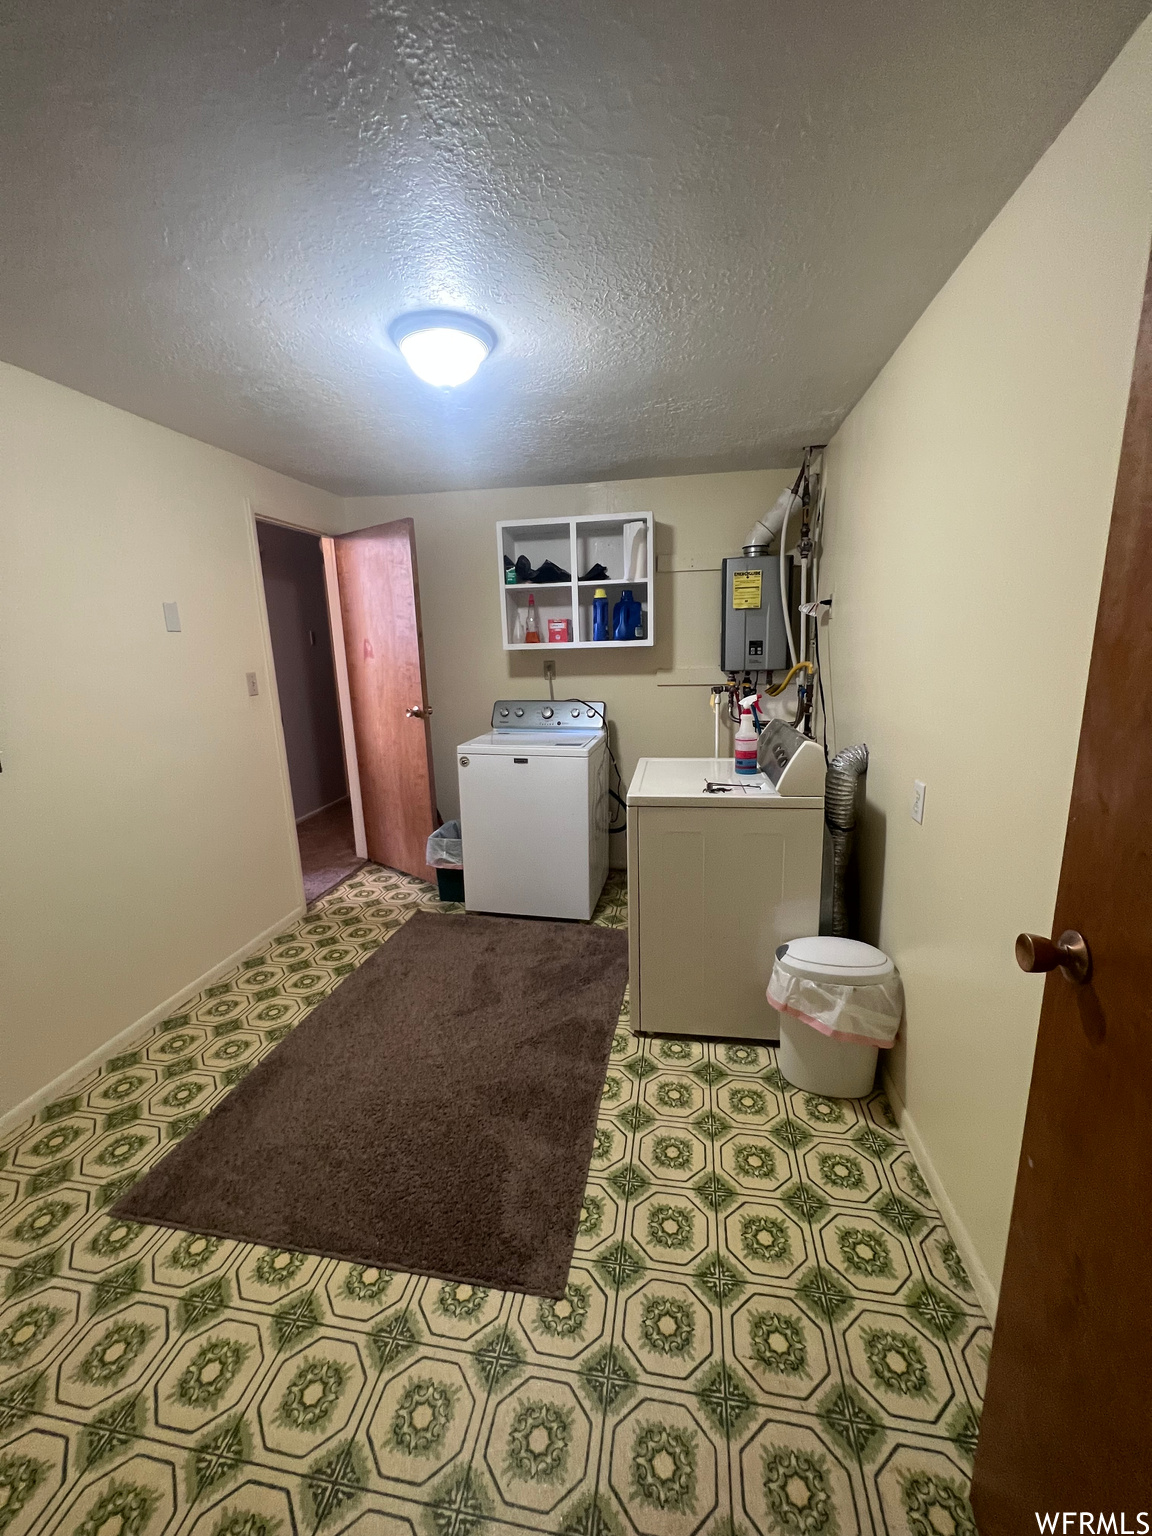 Laundry area featuring dark tile floors, a textured ceiling, independent washer and dryer, water heater, and washer / clothes dryer